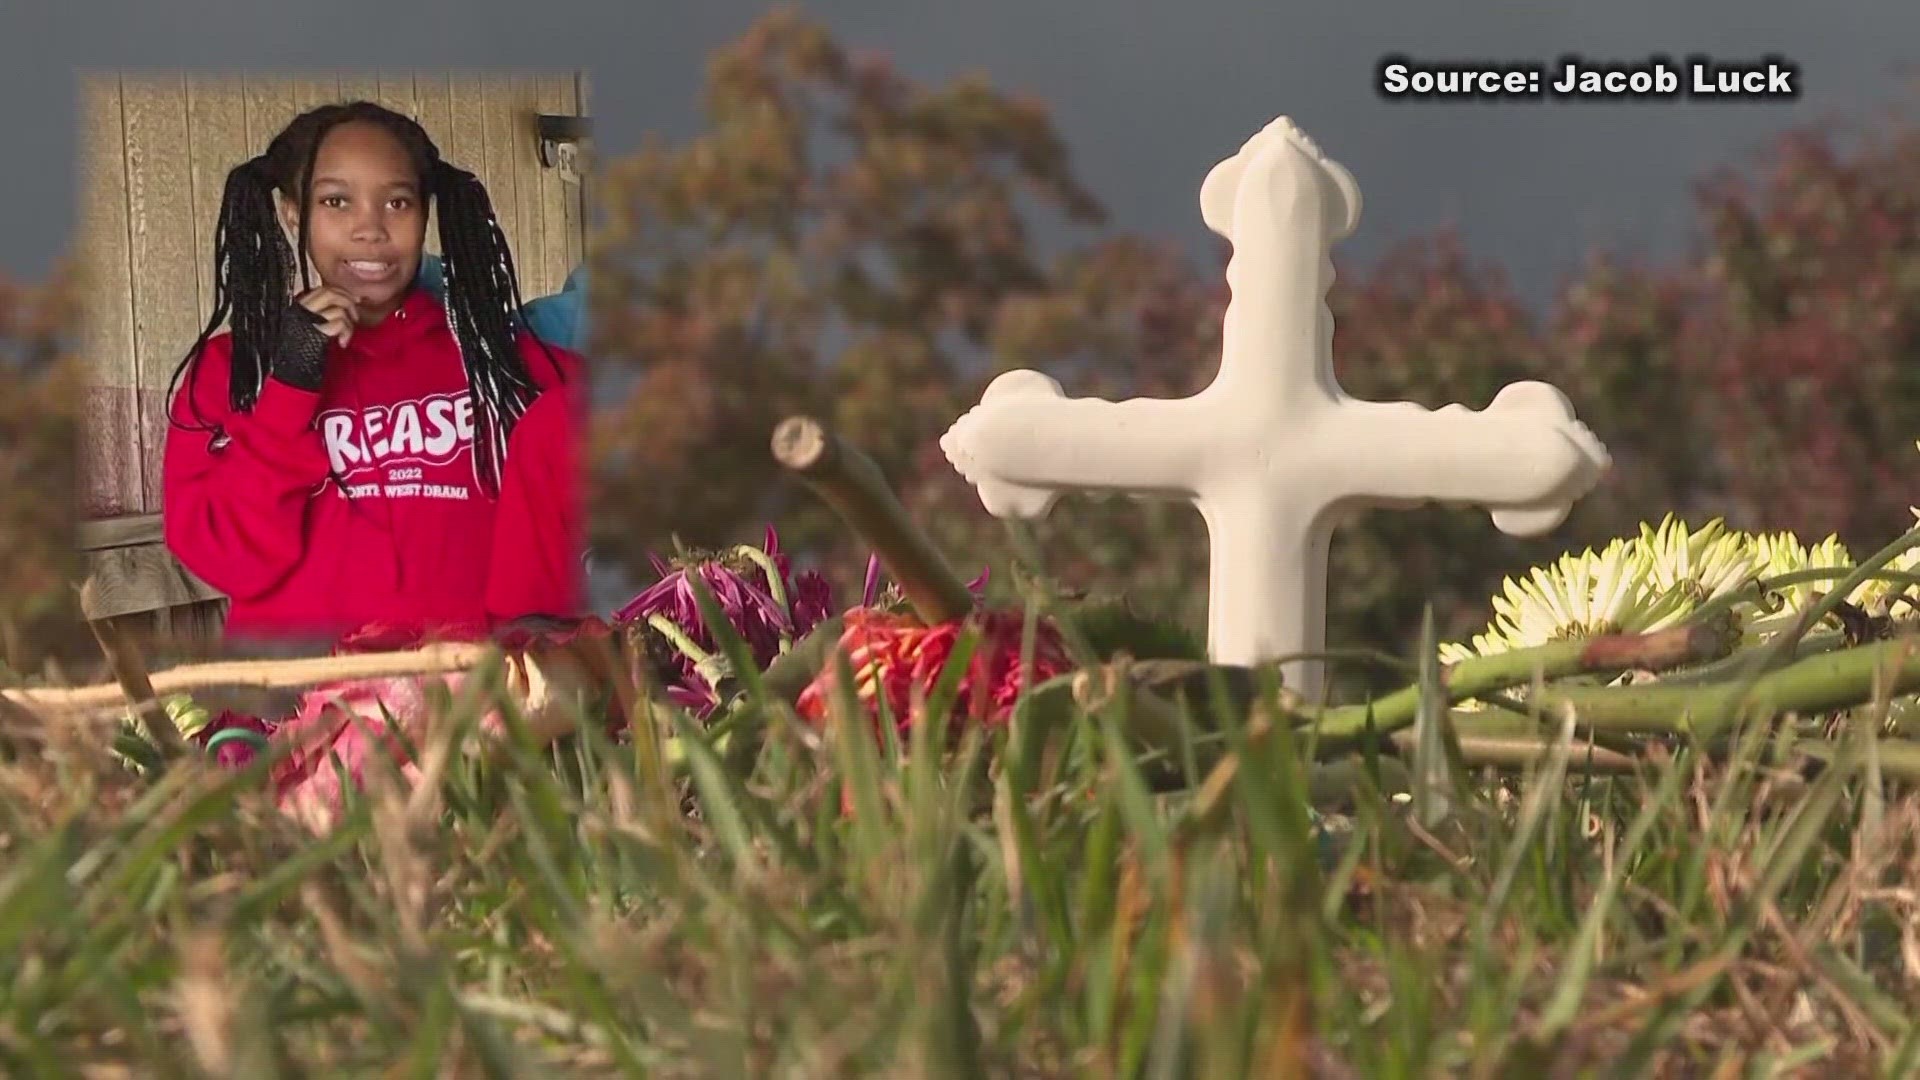 Aliyah Thornhill died while trick-or-treating in Oak Ridge in 2022. Loved ones organized a way to remember her.